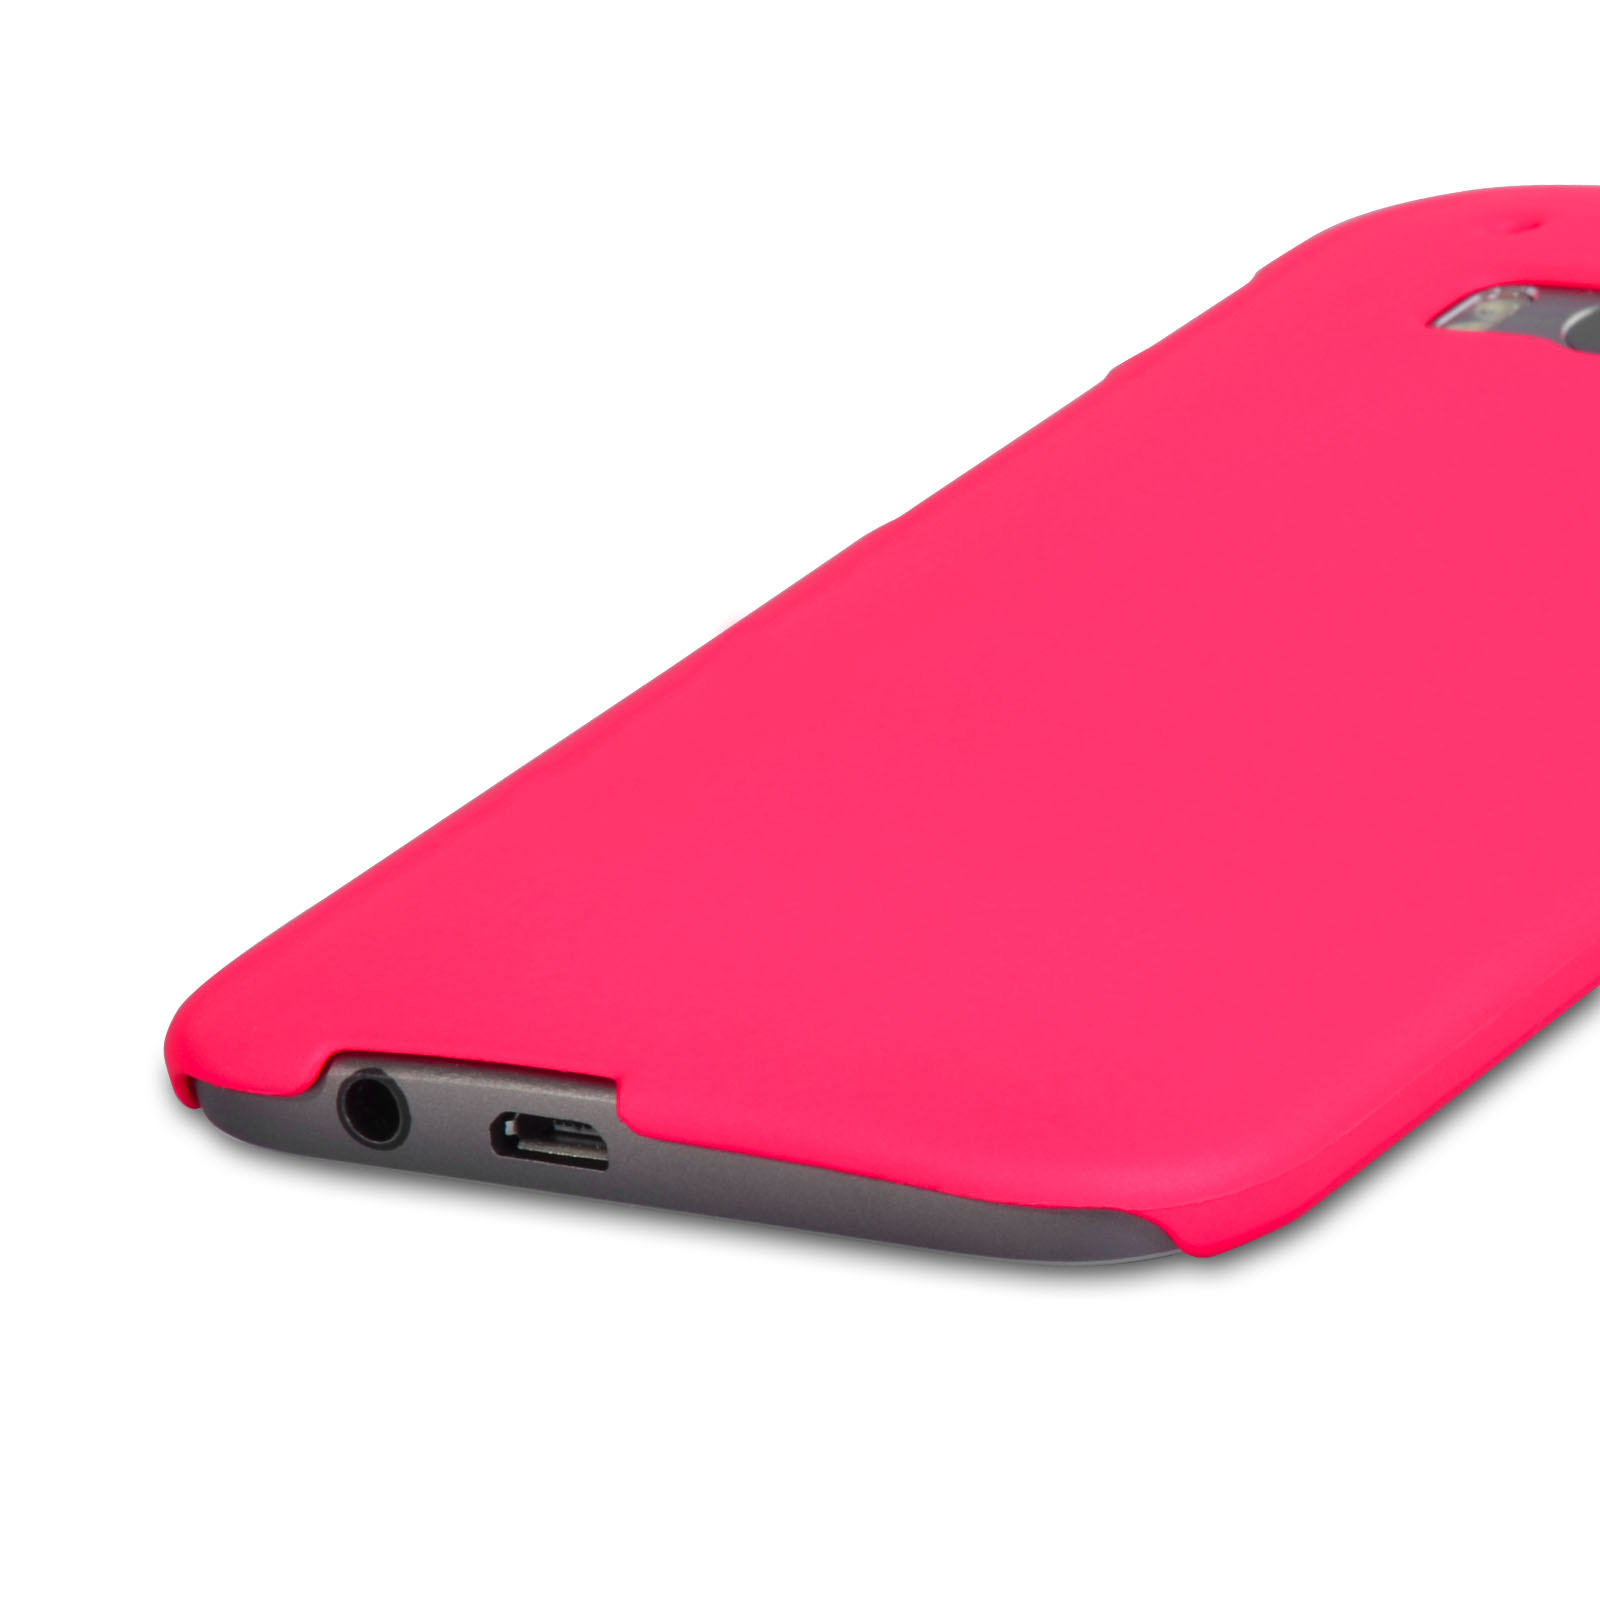 YouSave Accessories HTC One M8 Hard Hybrid Case - Hot Pink